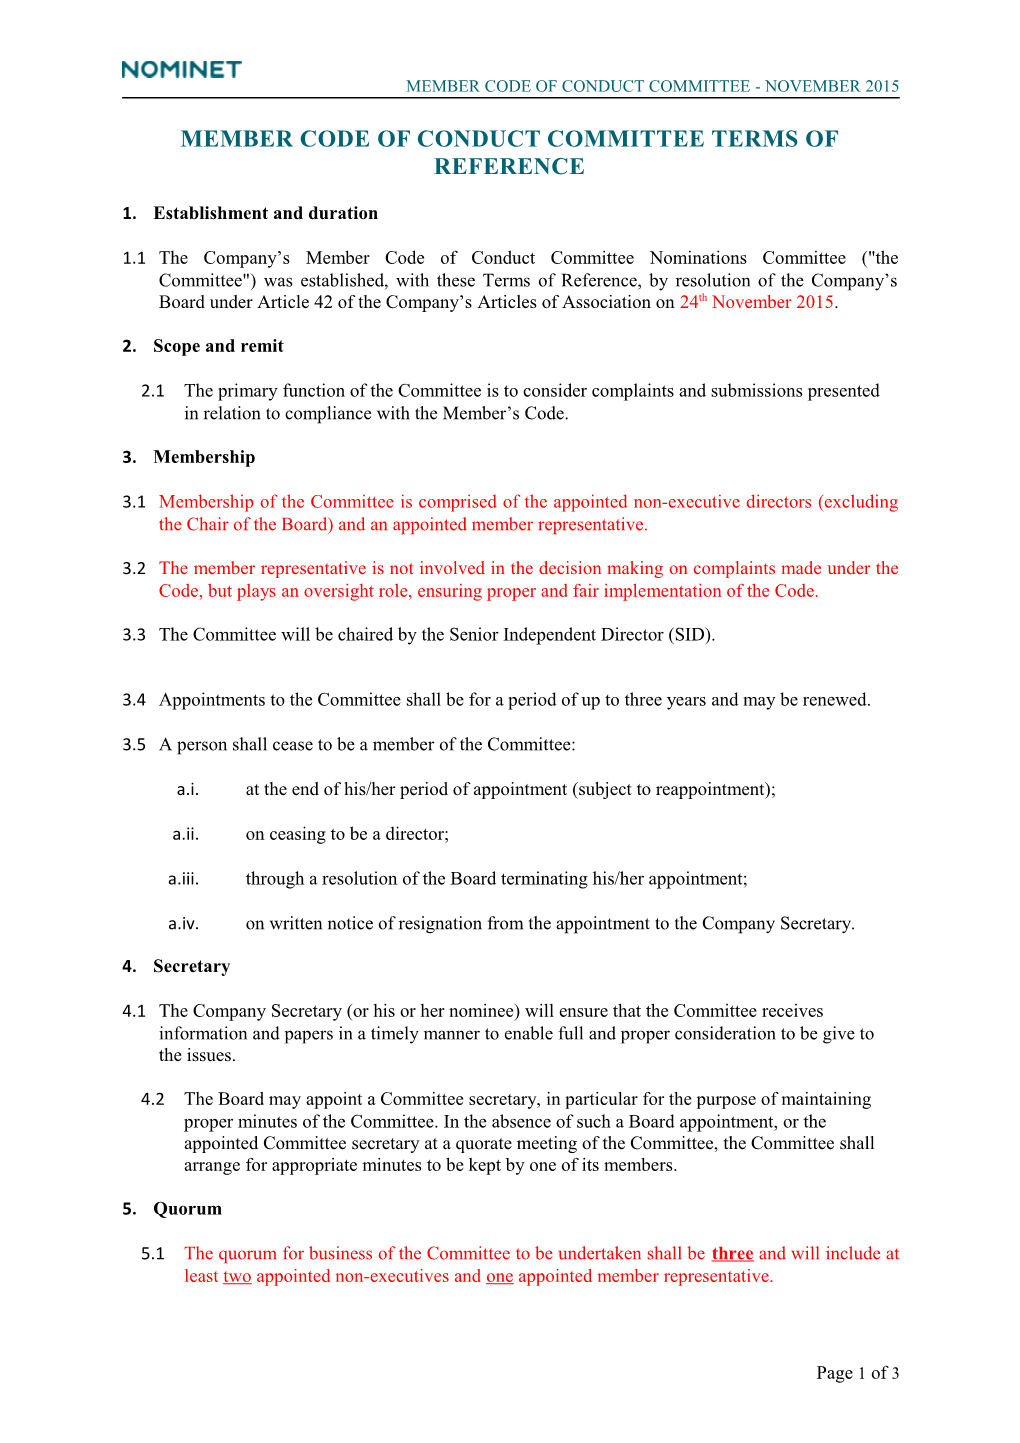 Nominations Committee Terms of Reference (Annual Review)